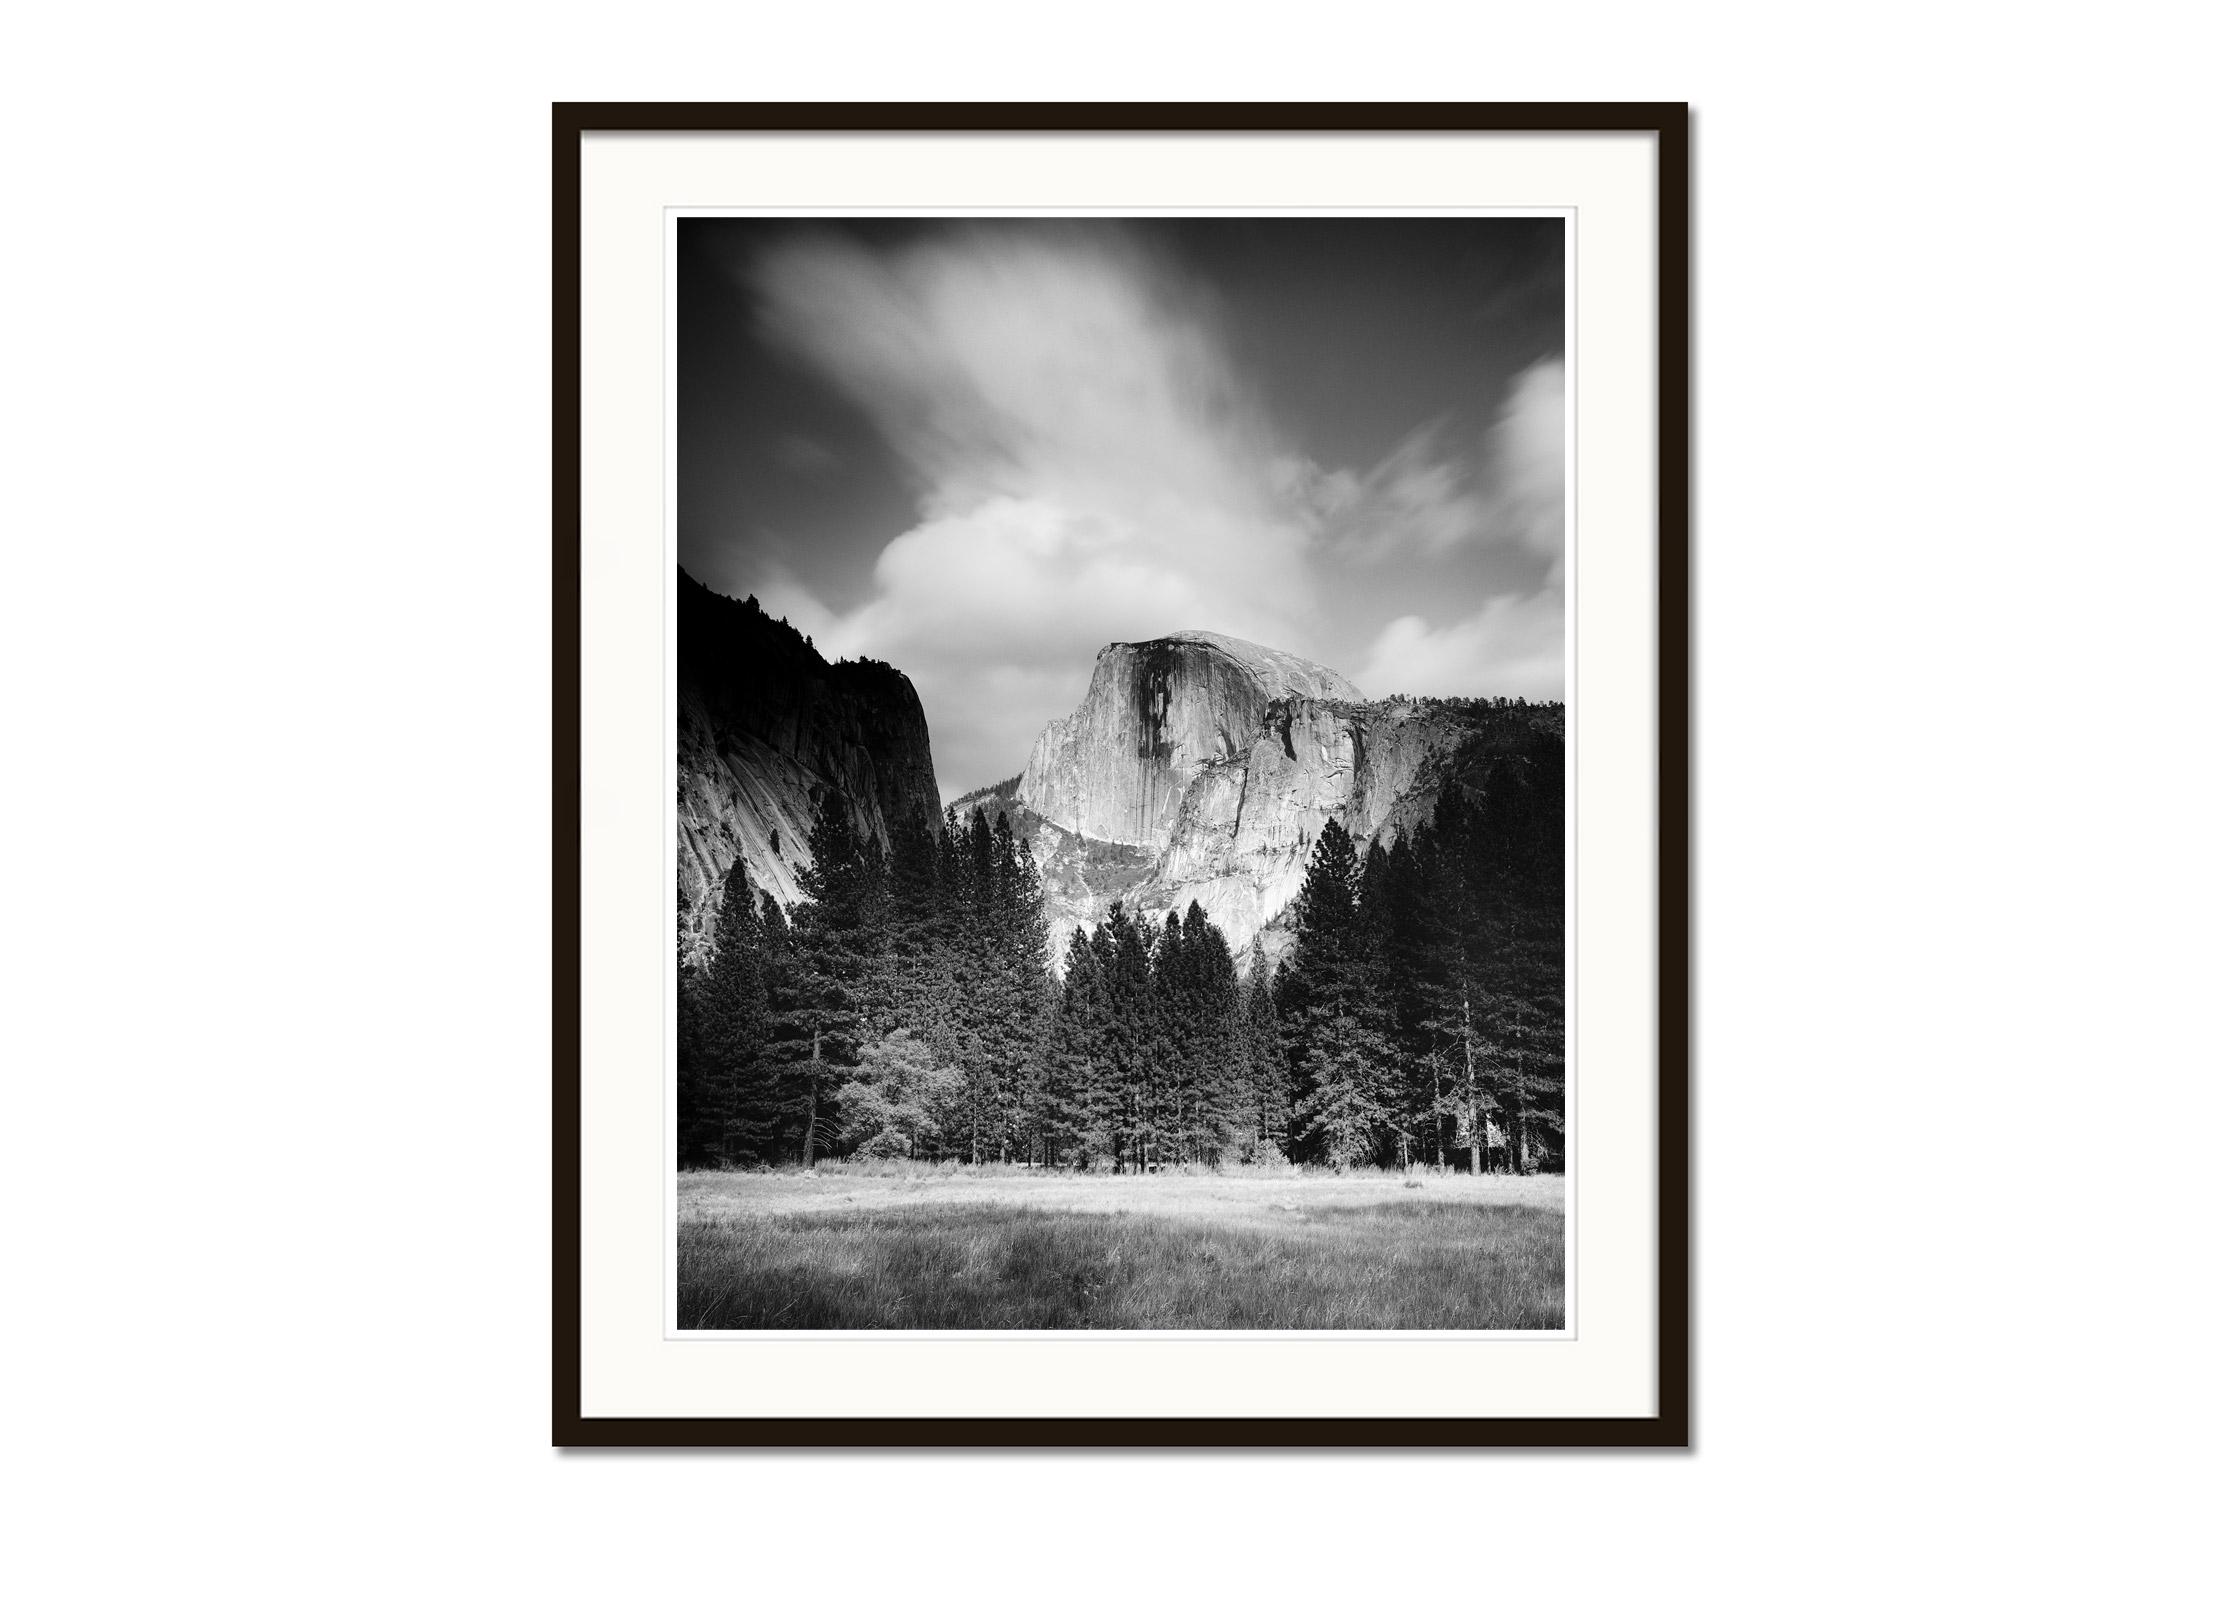 Black and white fine art long exposure landscape photography. Archival pigment ink print as part of a limited edition of 7. All Gerald Berghammer prints are made to order in limited editions on Hahnemuehle Photo Rag Baryta. Each print is stamped on